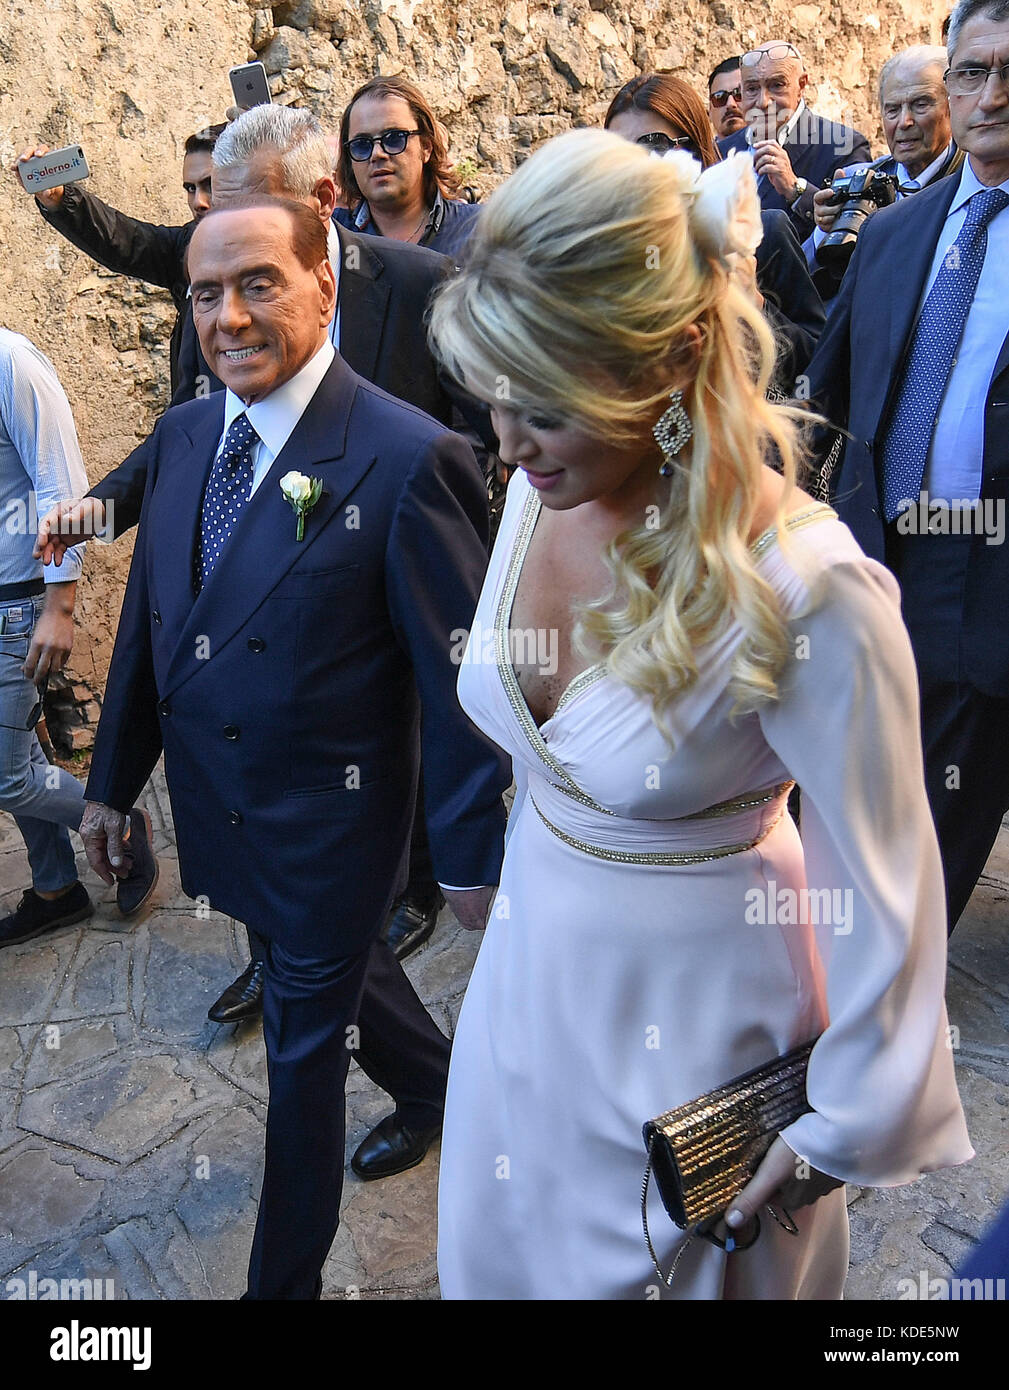 Ravello, Italy. 13th Oct, 2017. Silvio Berlusconi and Francesca Pascale in Ravello, at the wedding of her sister Marianna Pascale. 13/10/2017, Ravello, Italy Credit: Independent Photo Agency Srl/Alamy Live News Stock Photo